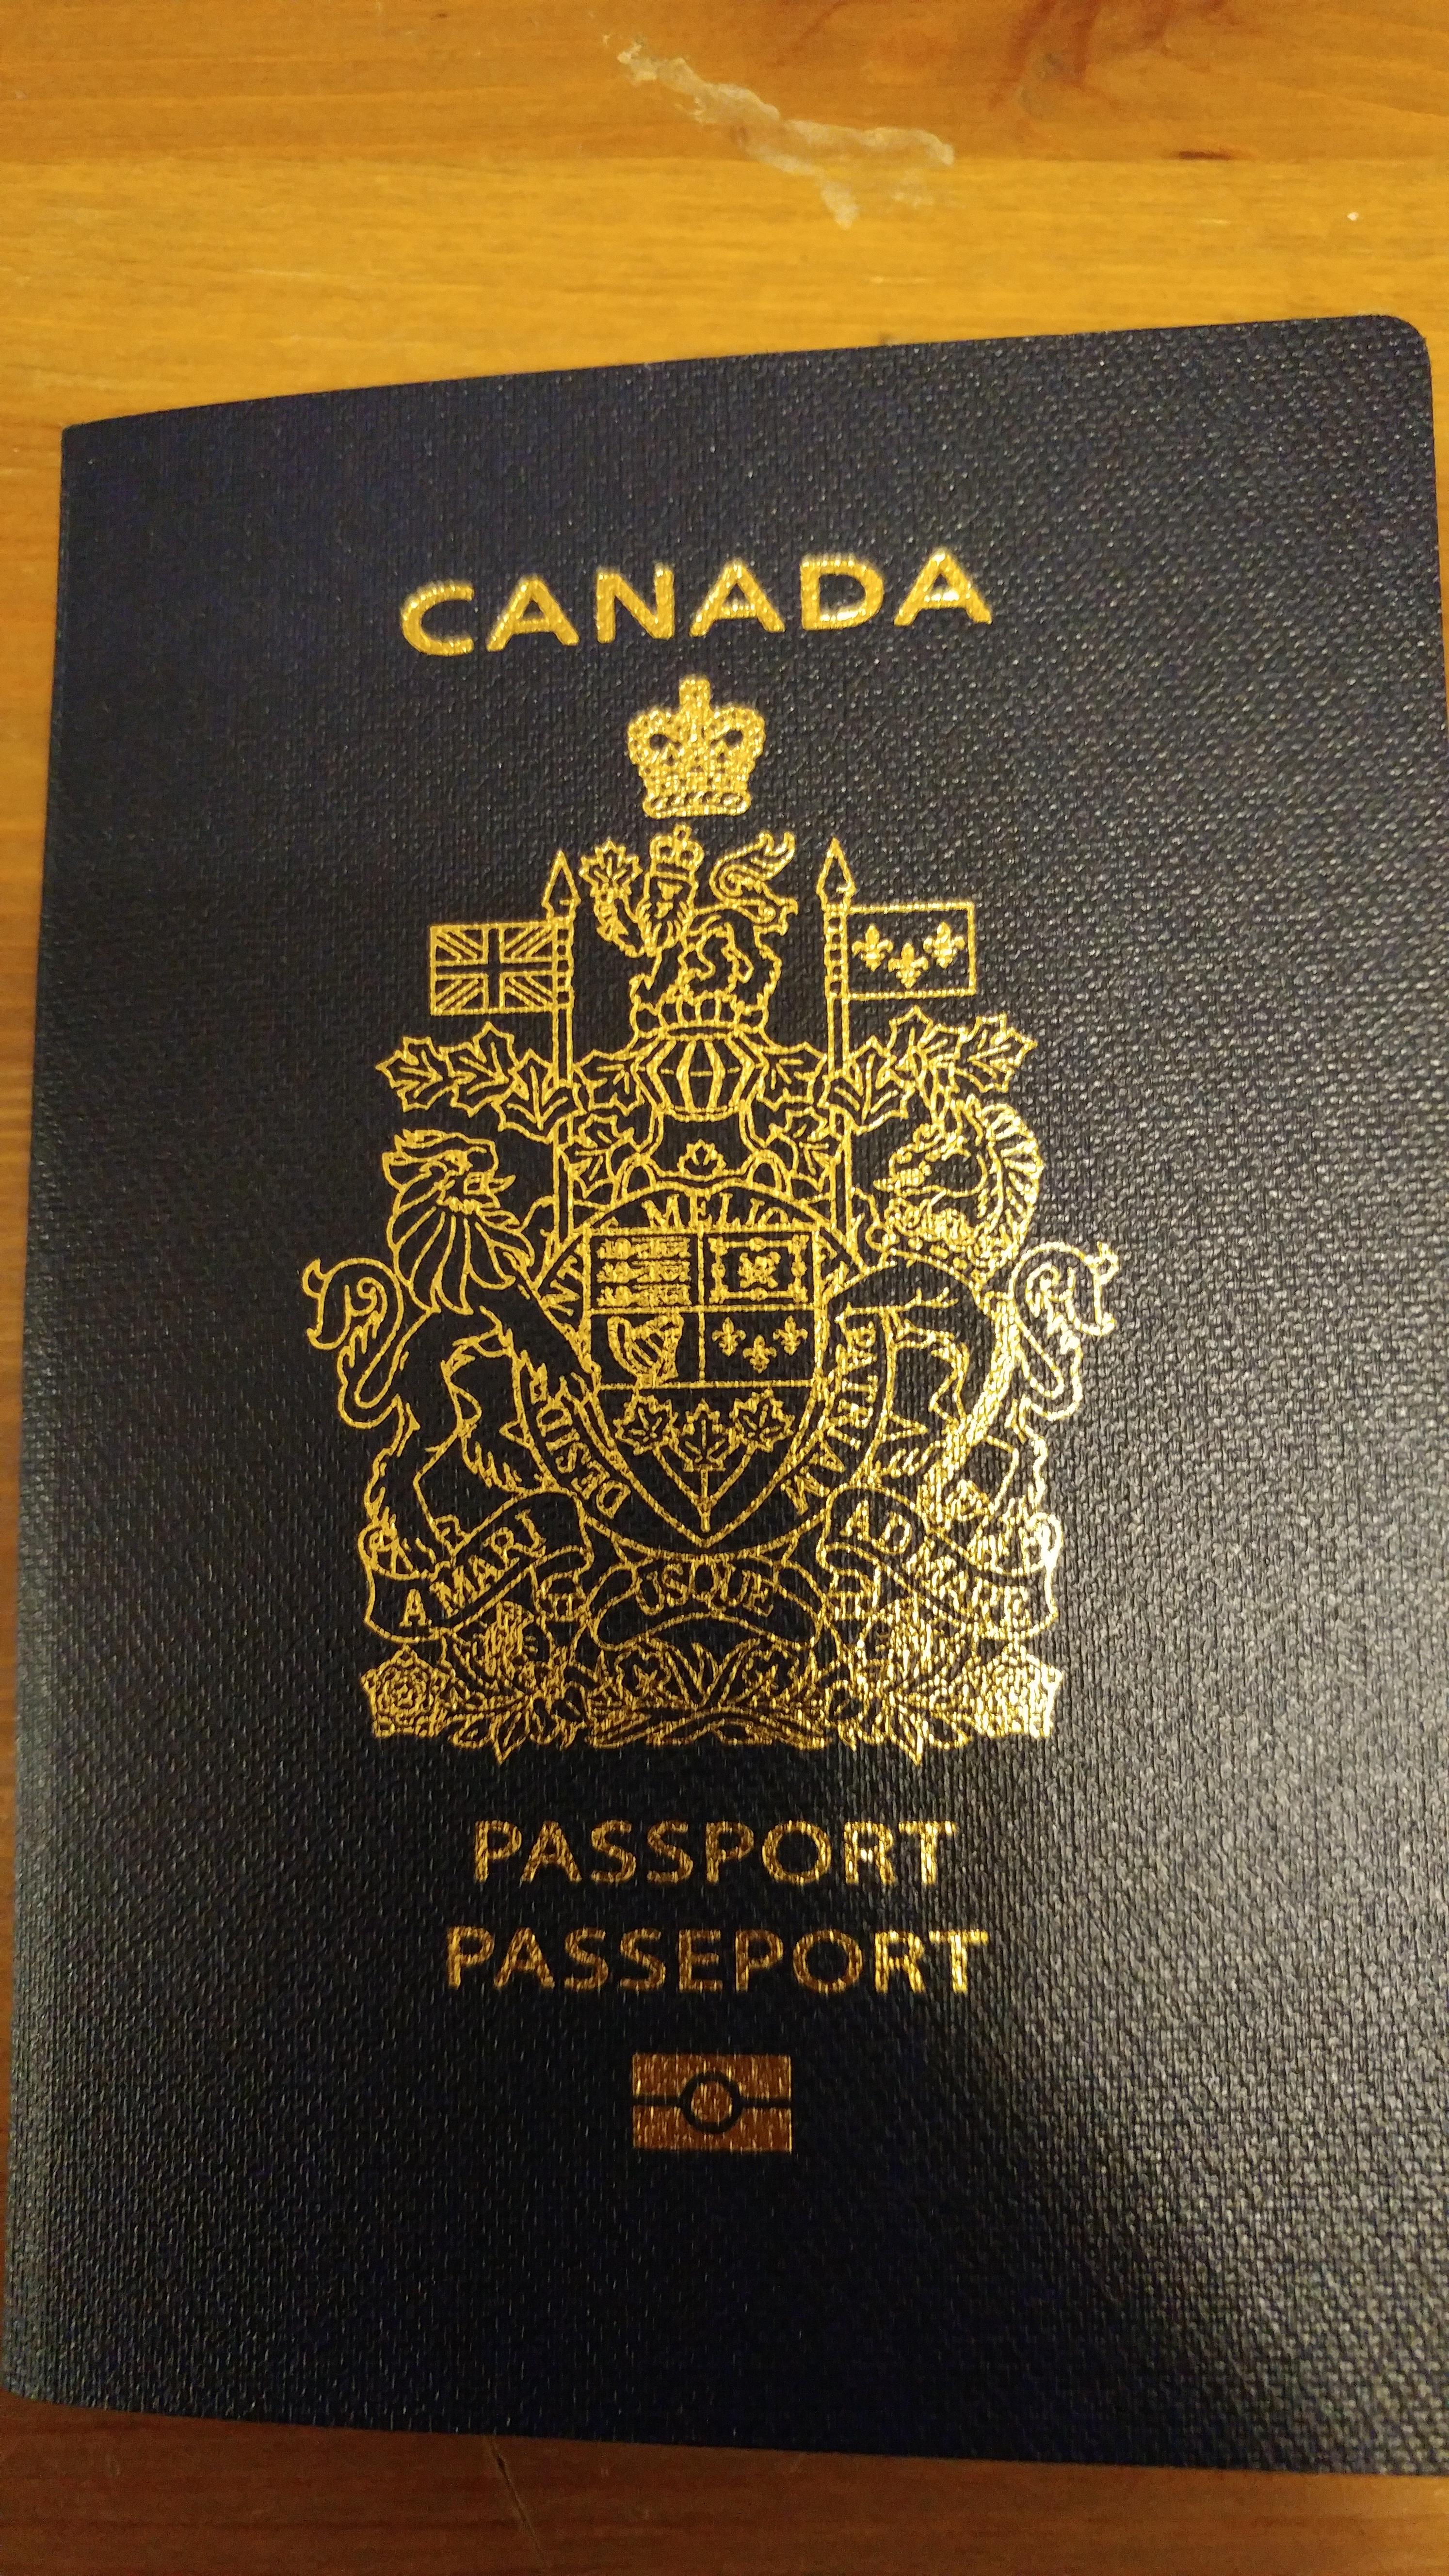 The front of the Canadian passport has a unicorn on it - Album on Imgur